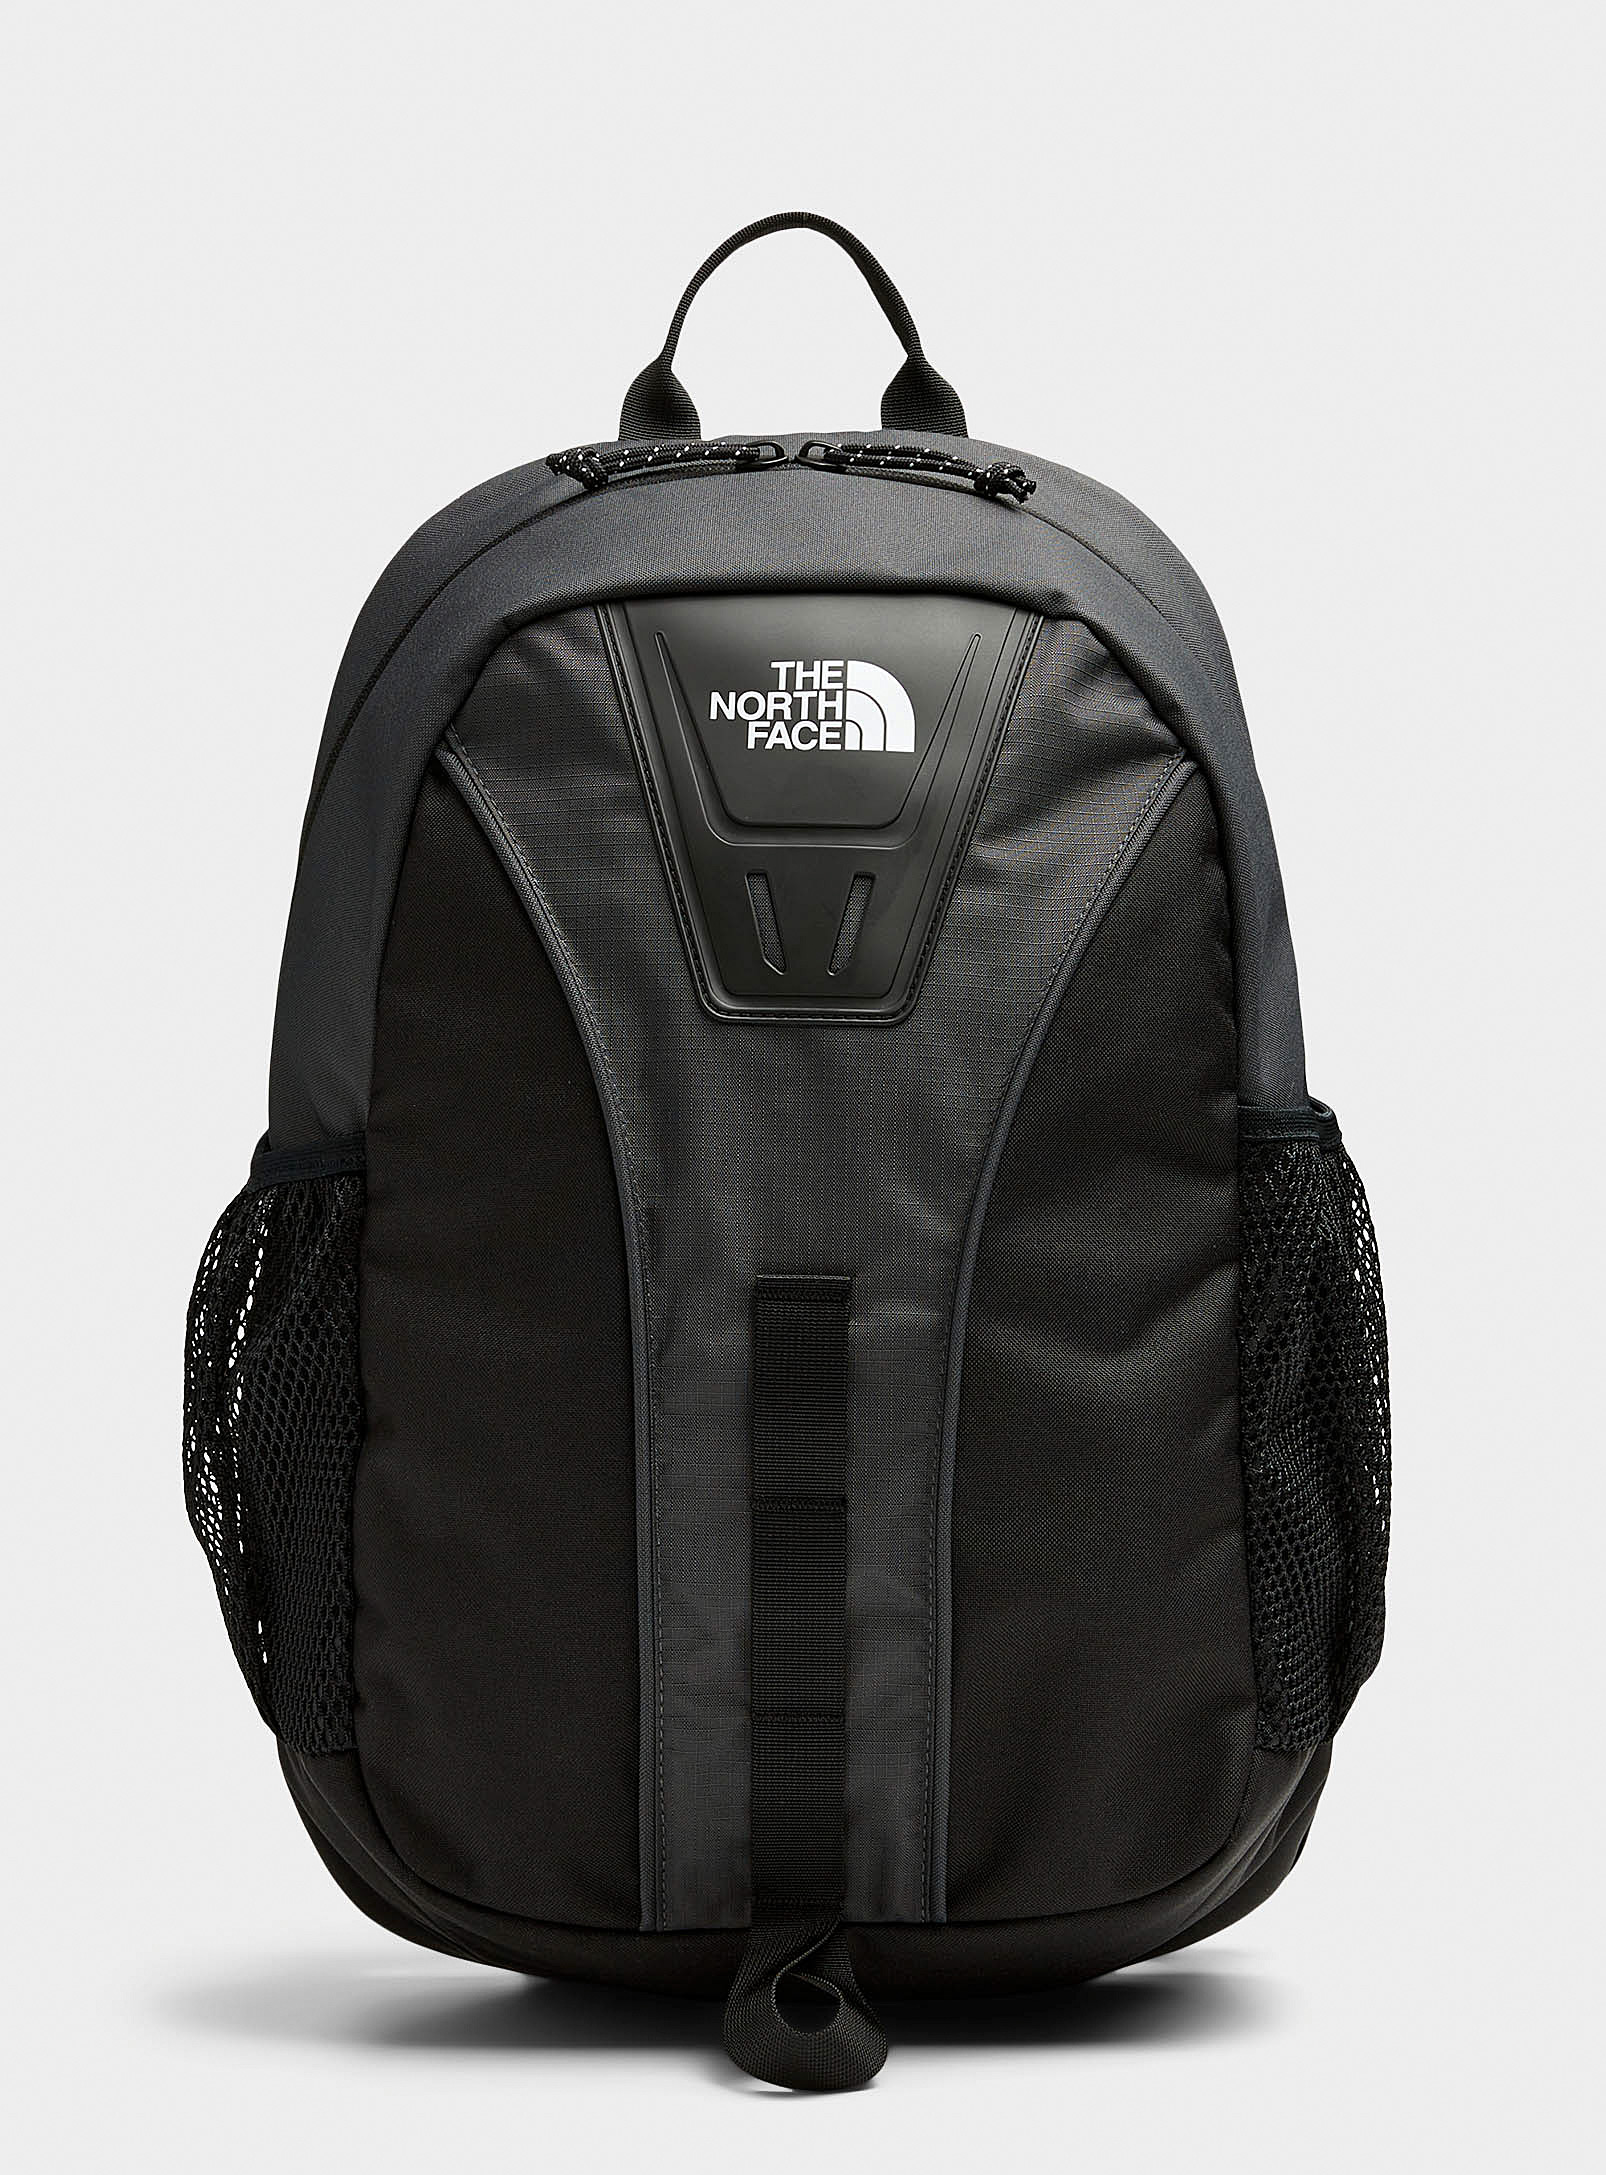 The North Face - Le sac à dos Daypack Tech